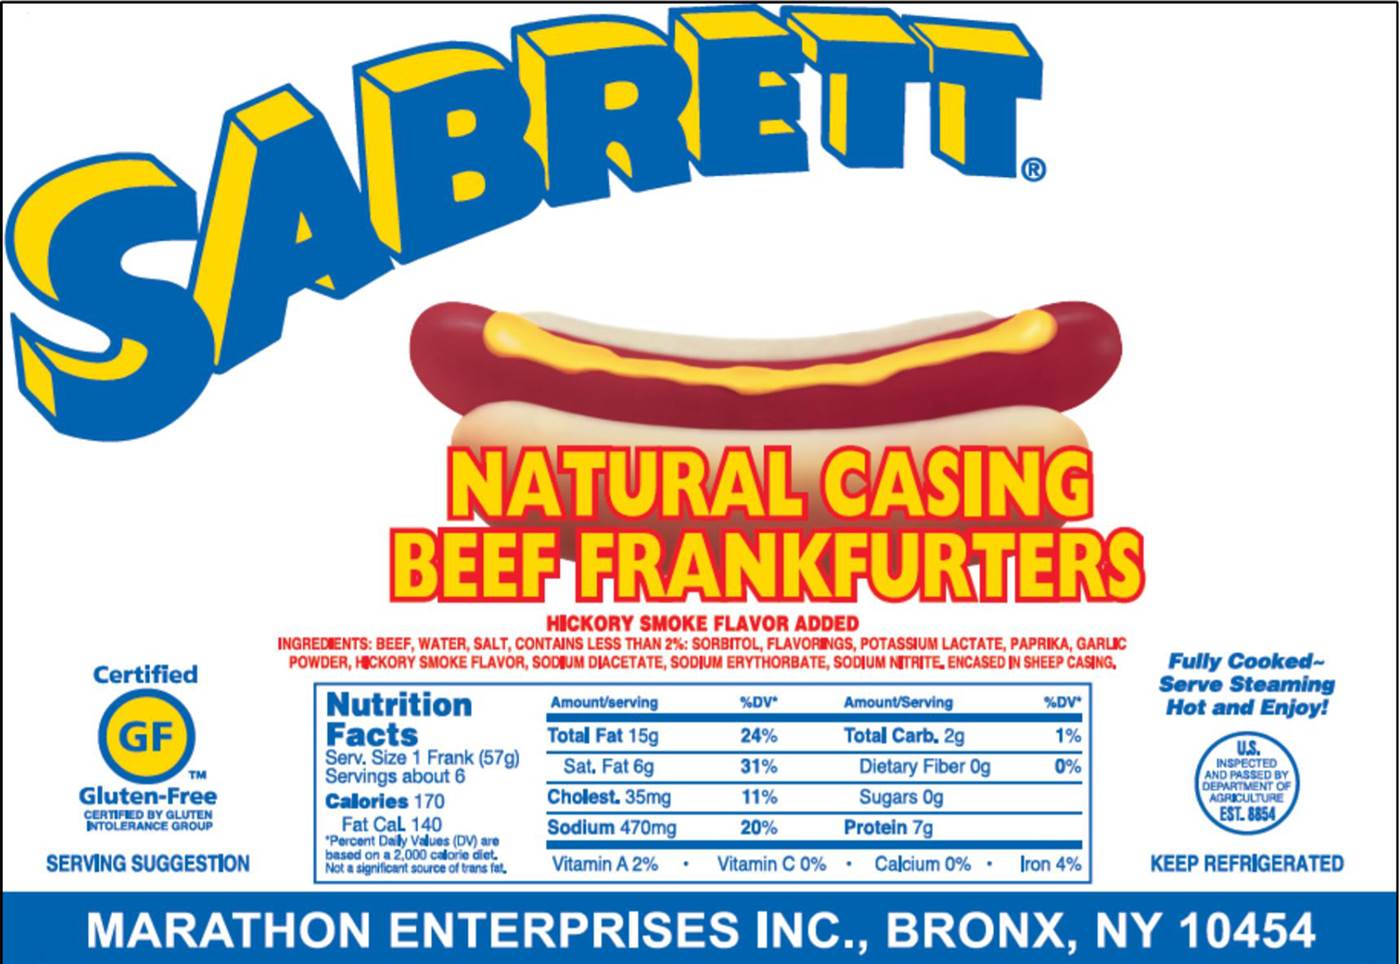 Image of Recalled Sabrett Hot Dogs